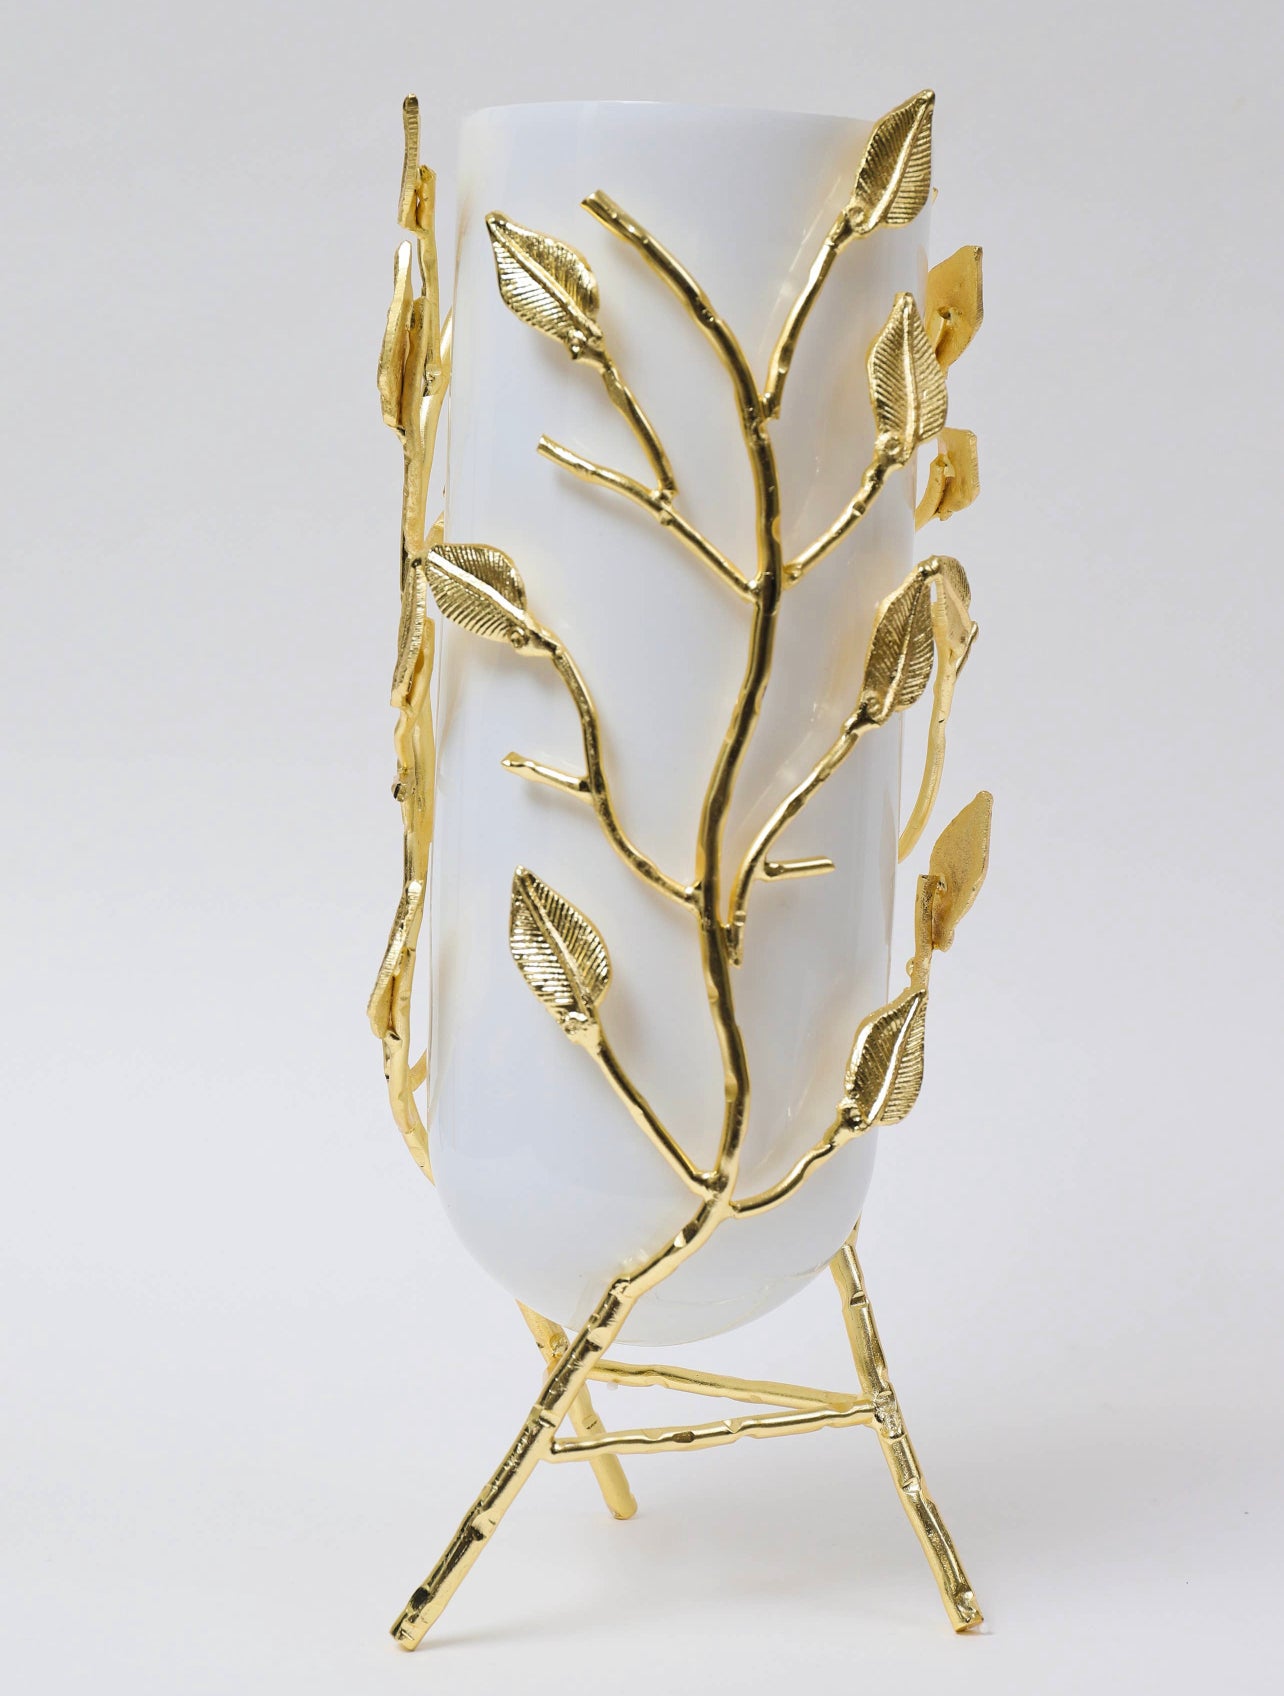 16H Gold Metal Branch Decorative Vase With Luxurious White Glass Insert.